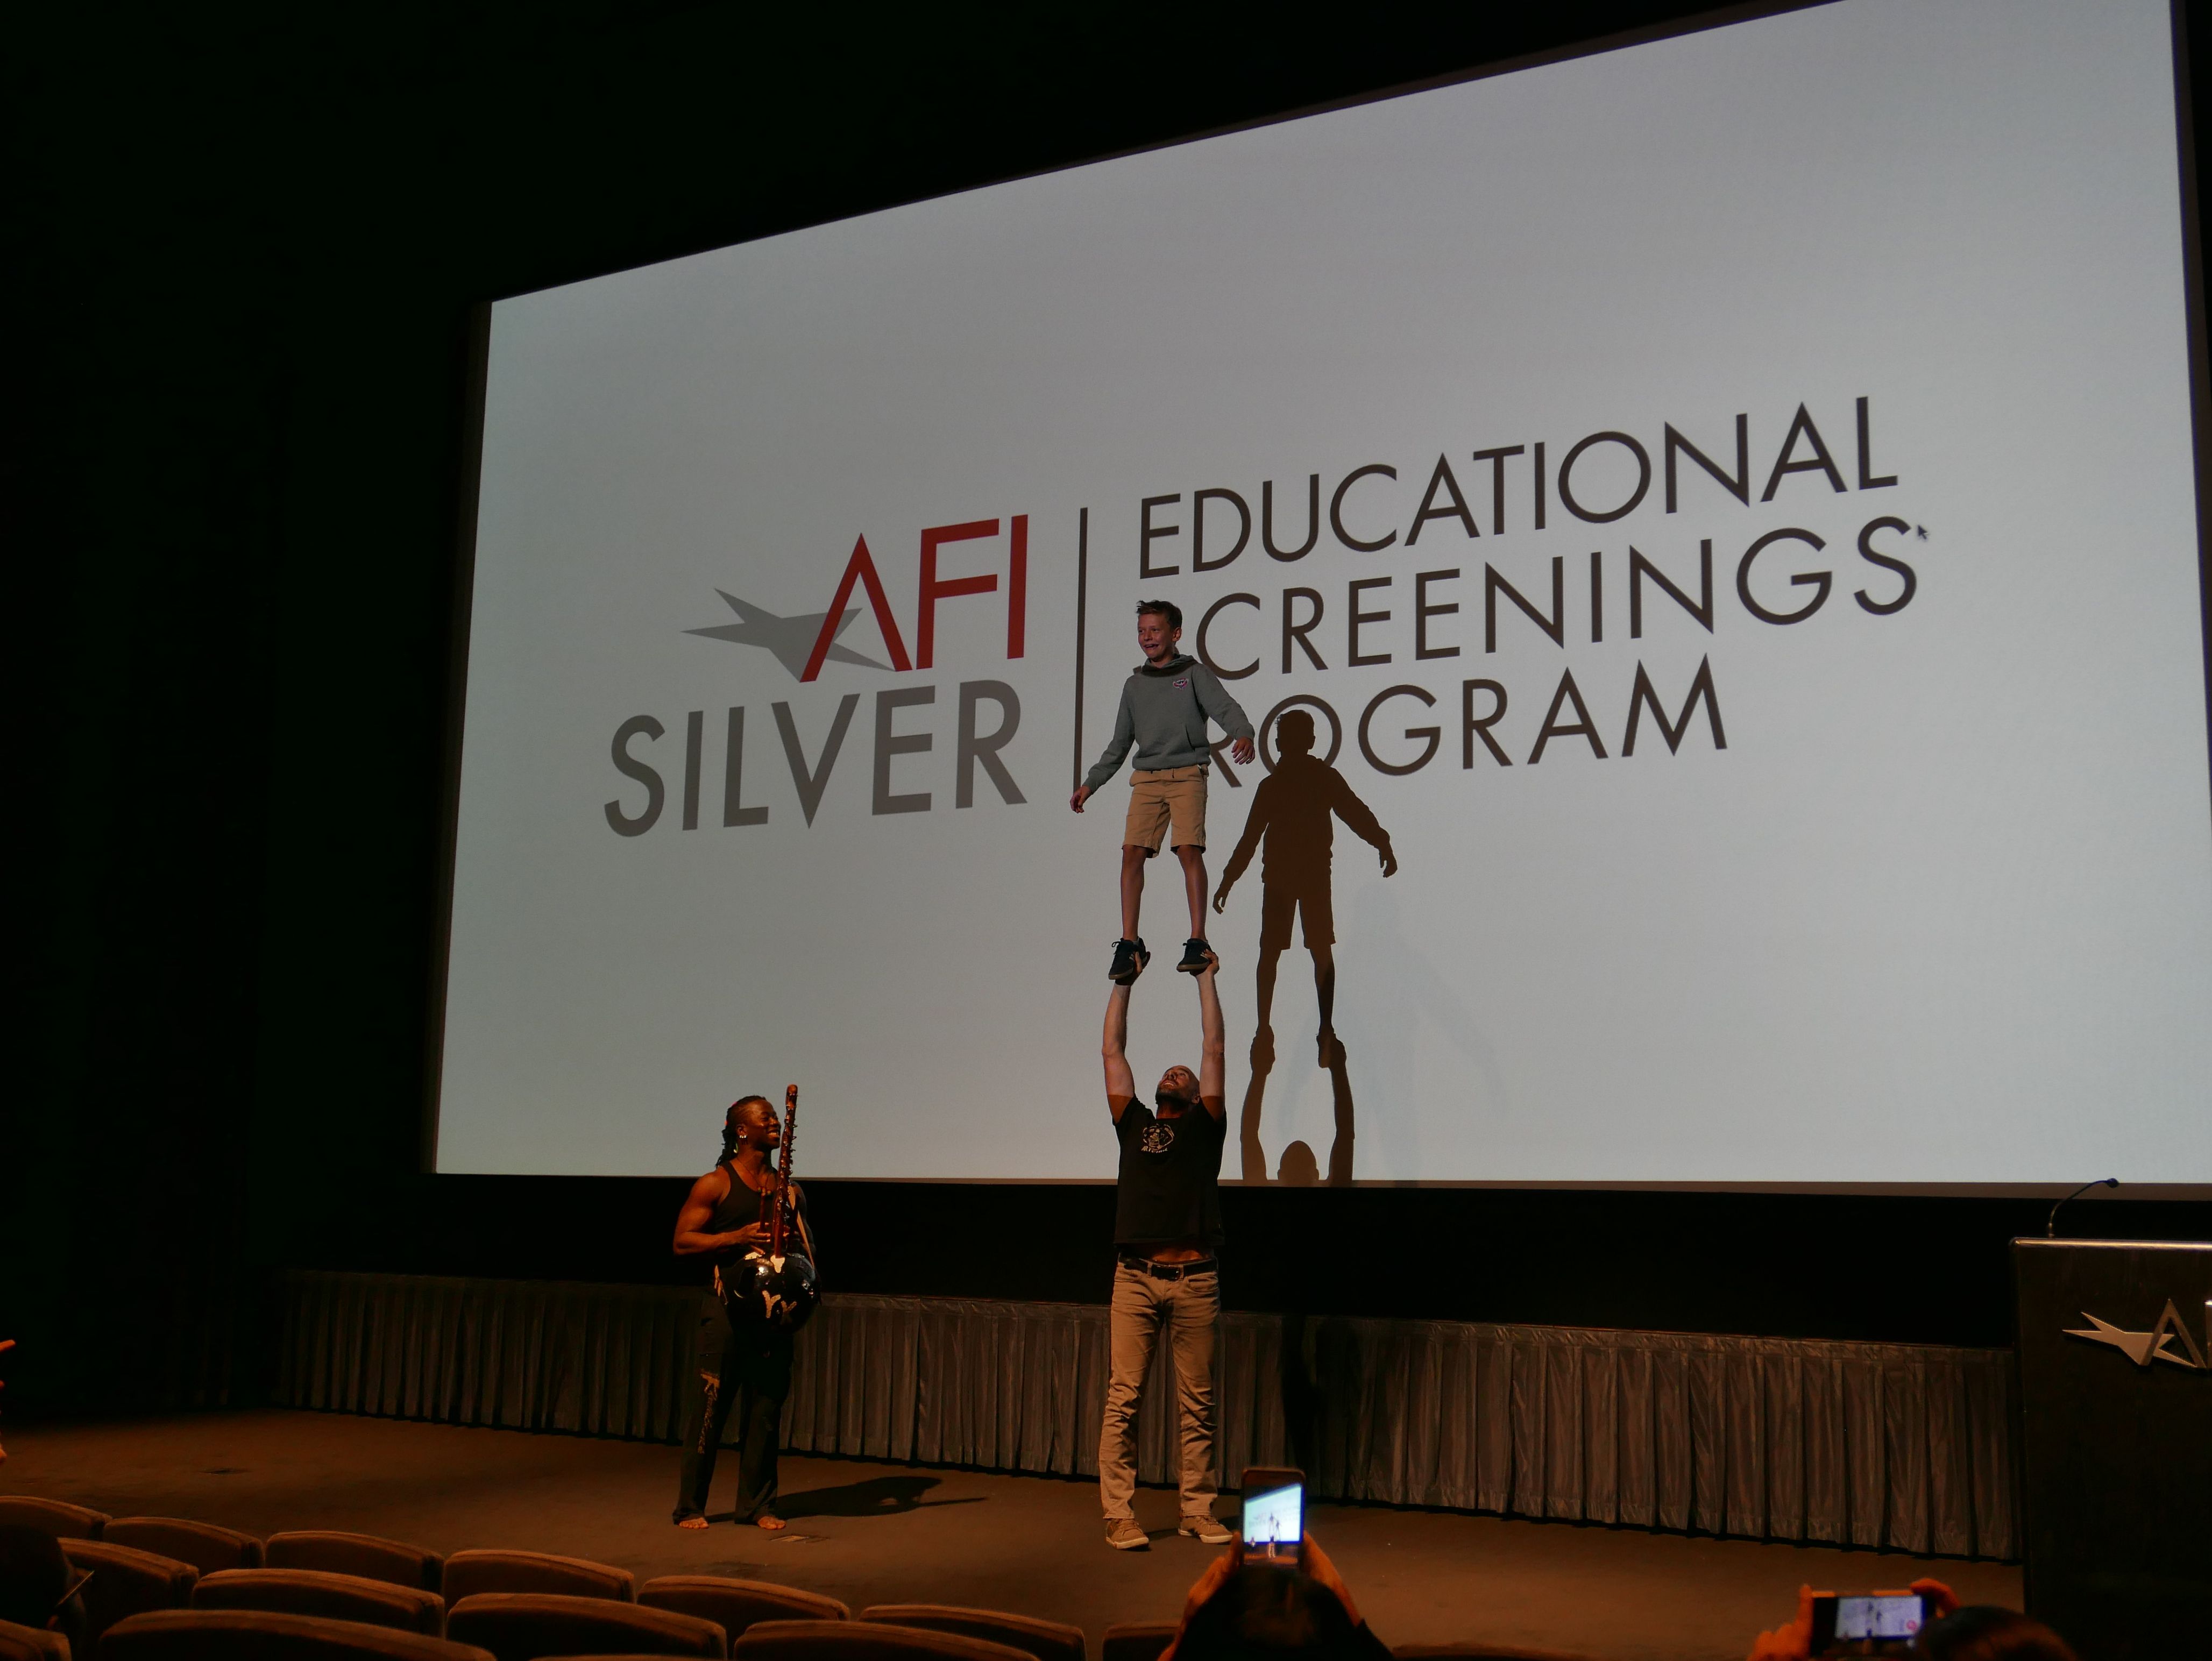 Guillaume Saladin and Yamoussa Bangoura talk and perform for DC students at the American Film Institute Silver Theater after a screening of Circus Without Borders. Image by Meerabelle Jesuthasan. USA, 2019.